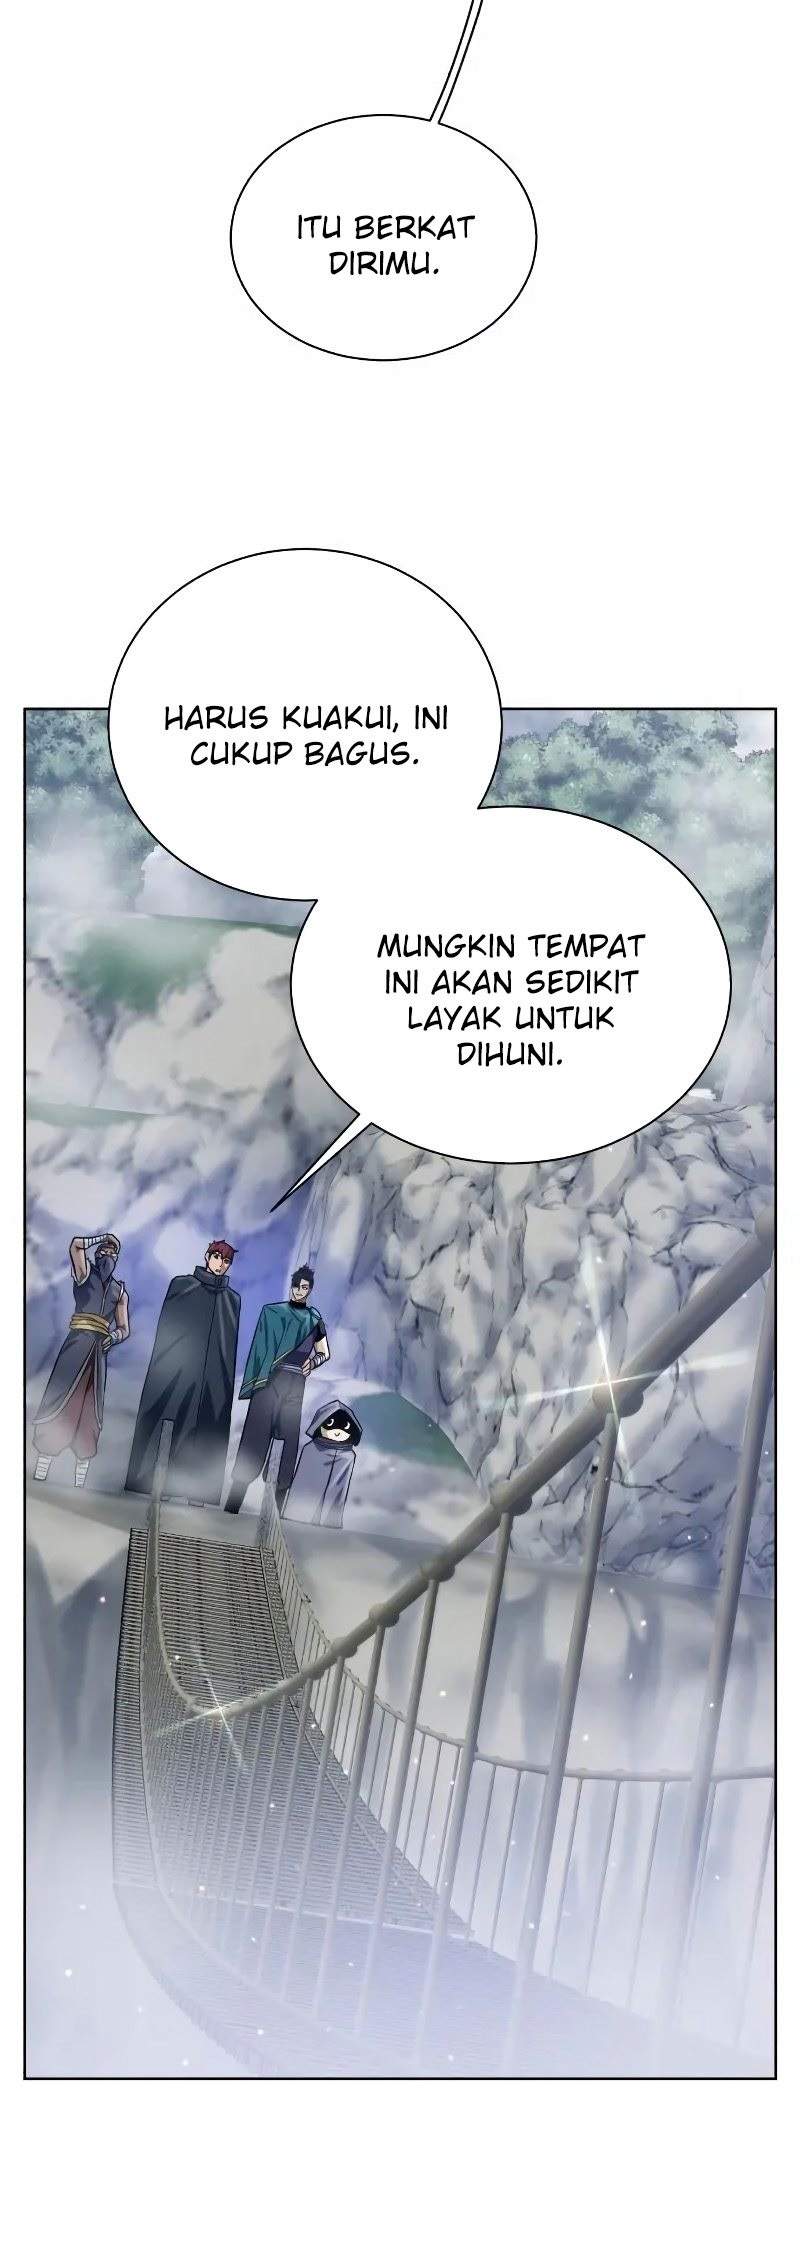 Dungeons &amp; Artifacts Chapter 43